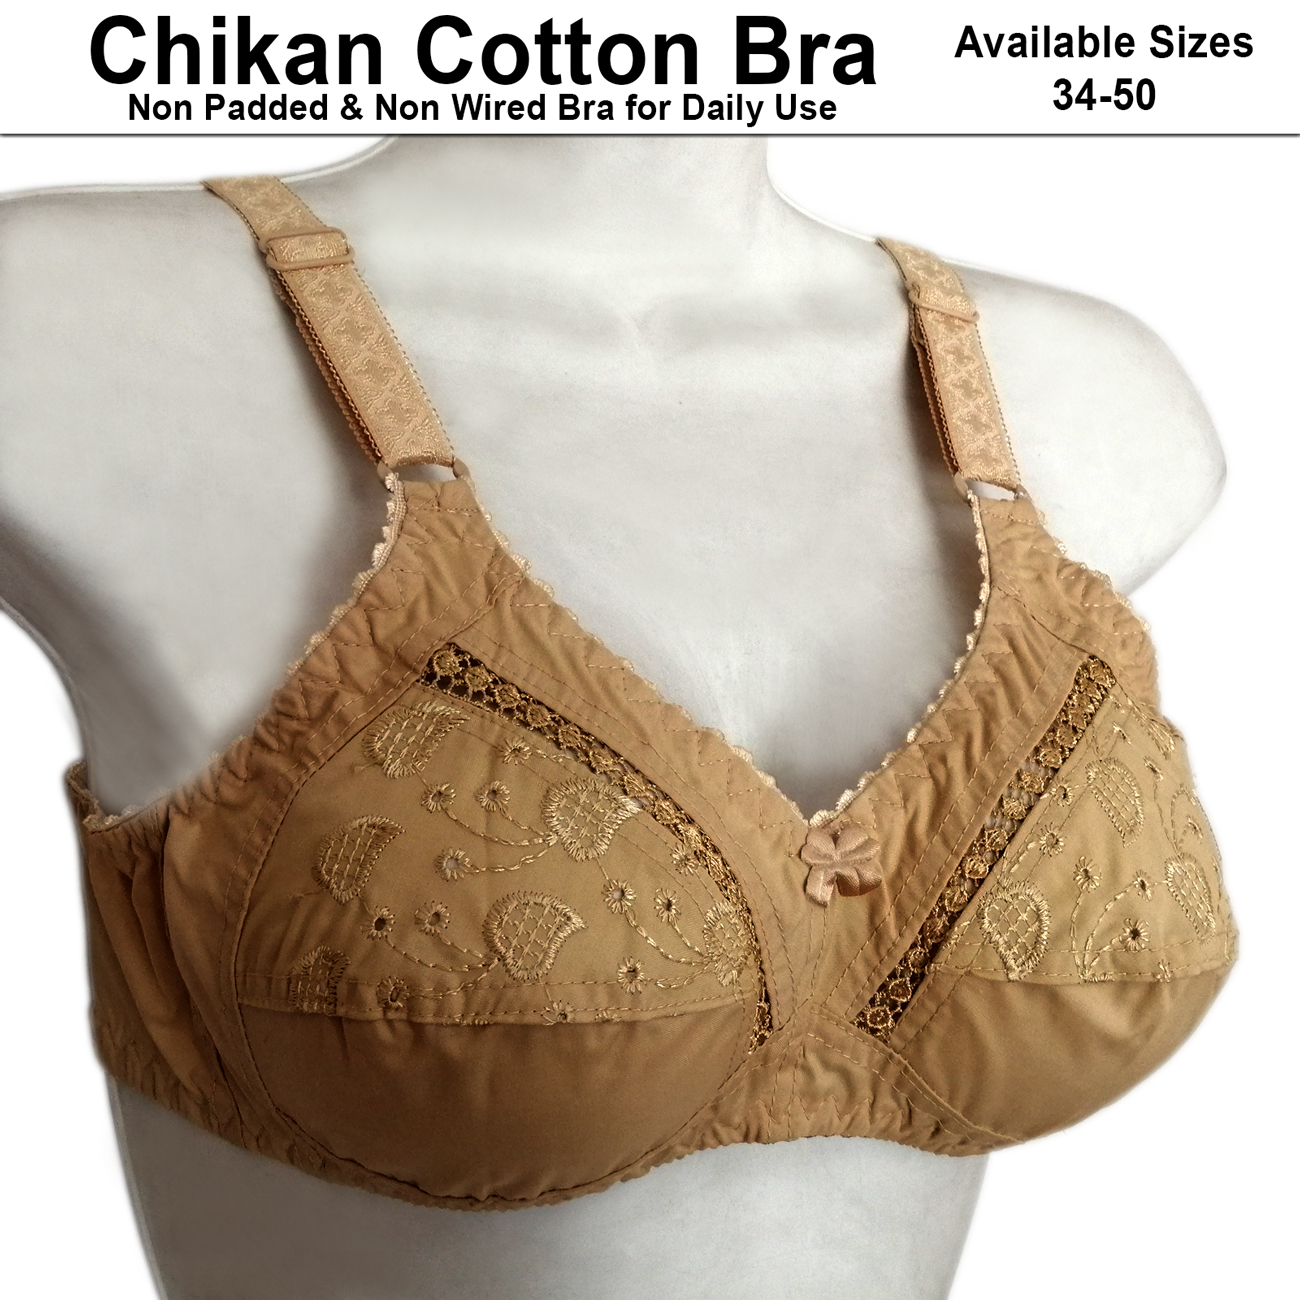 Good Quality Classic Cotton Bras for Women B Cups Non Padded Bra